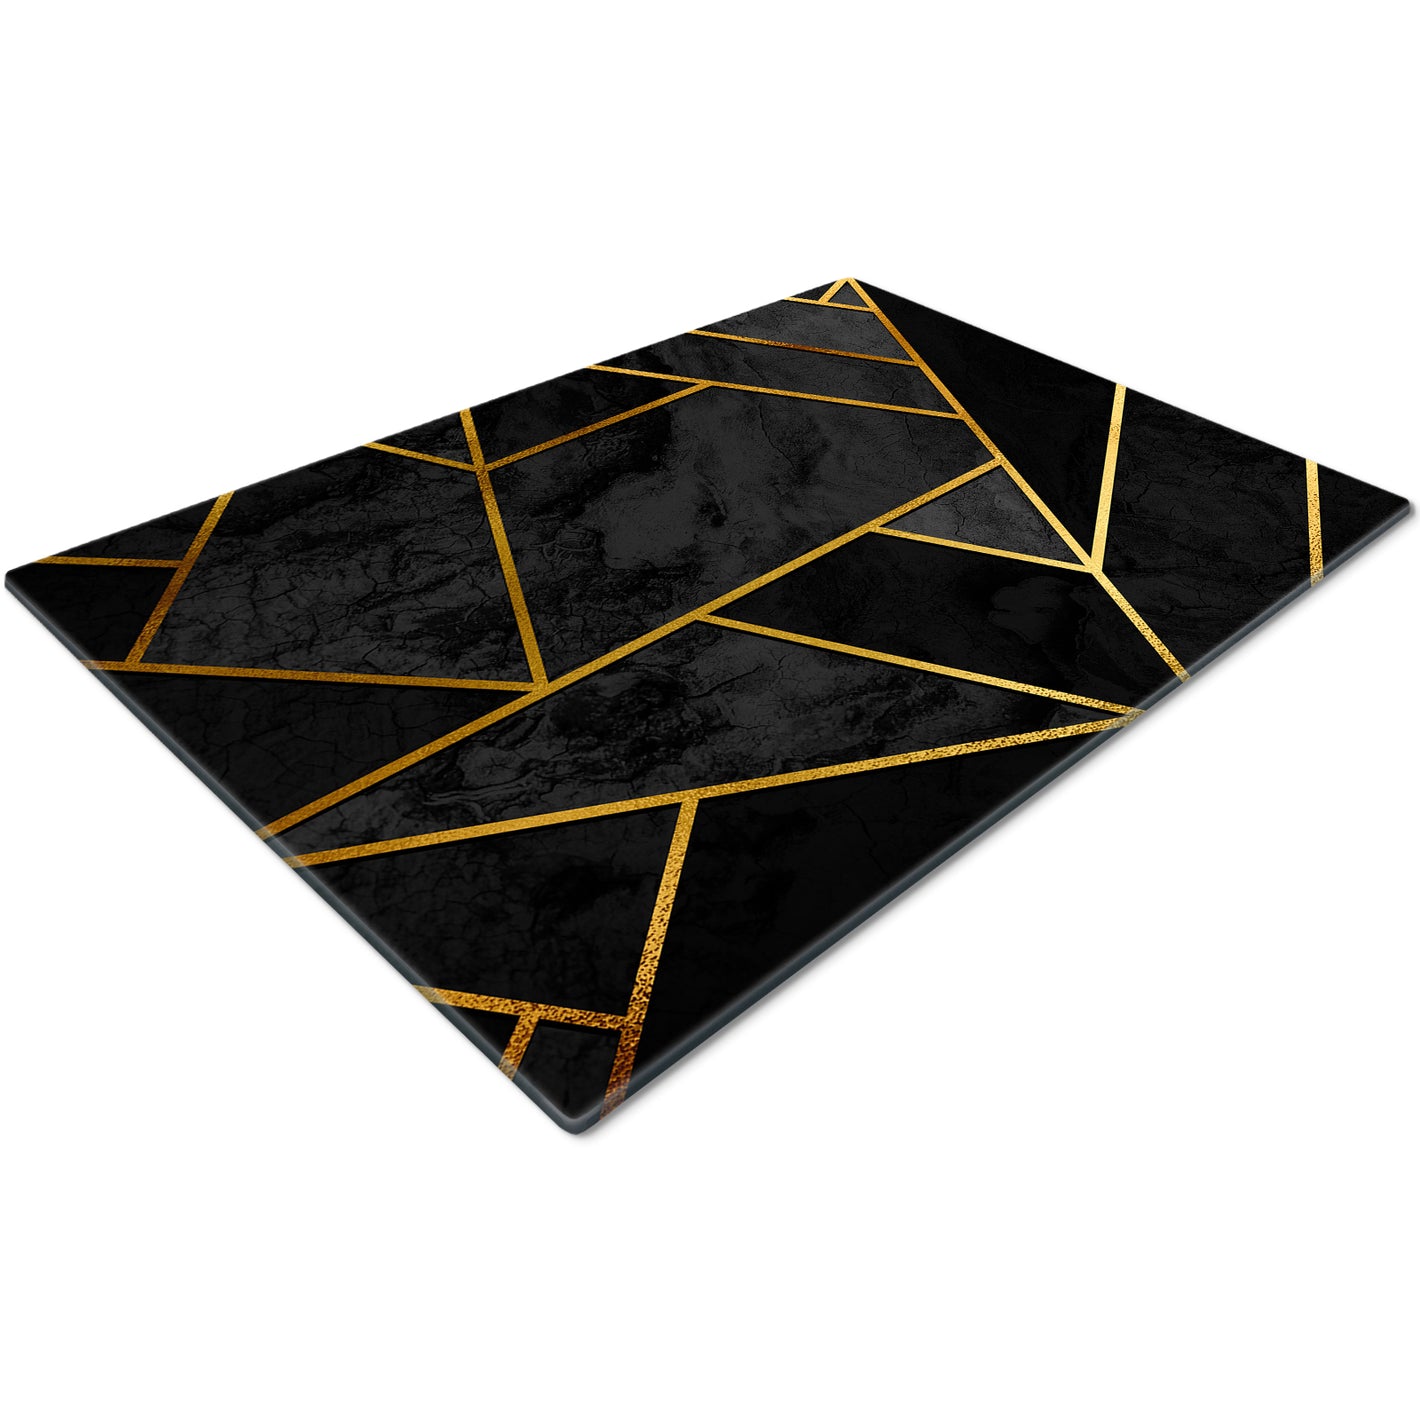 Glass Chopping Board for Kitchen in Black Gold Geometric Design